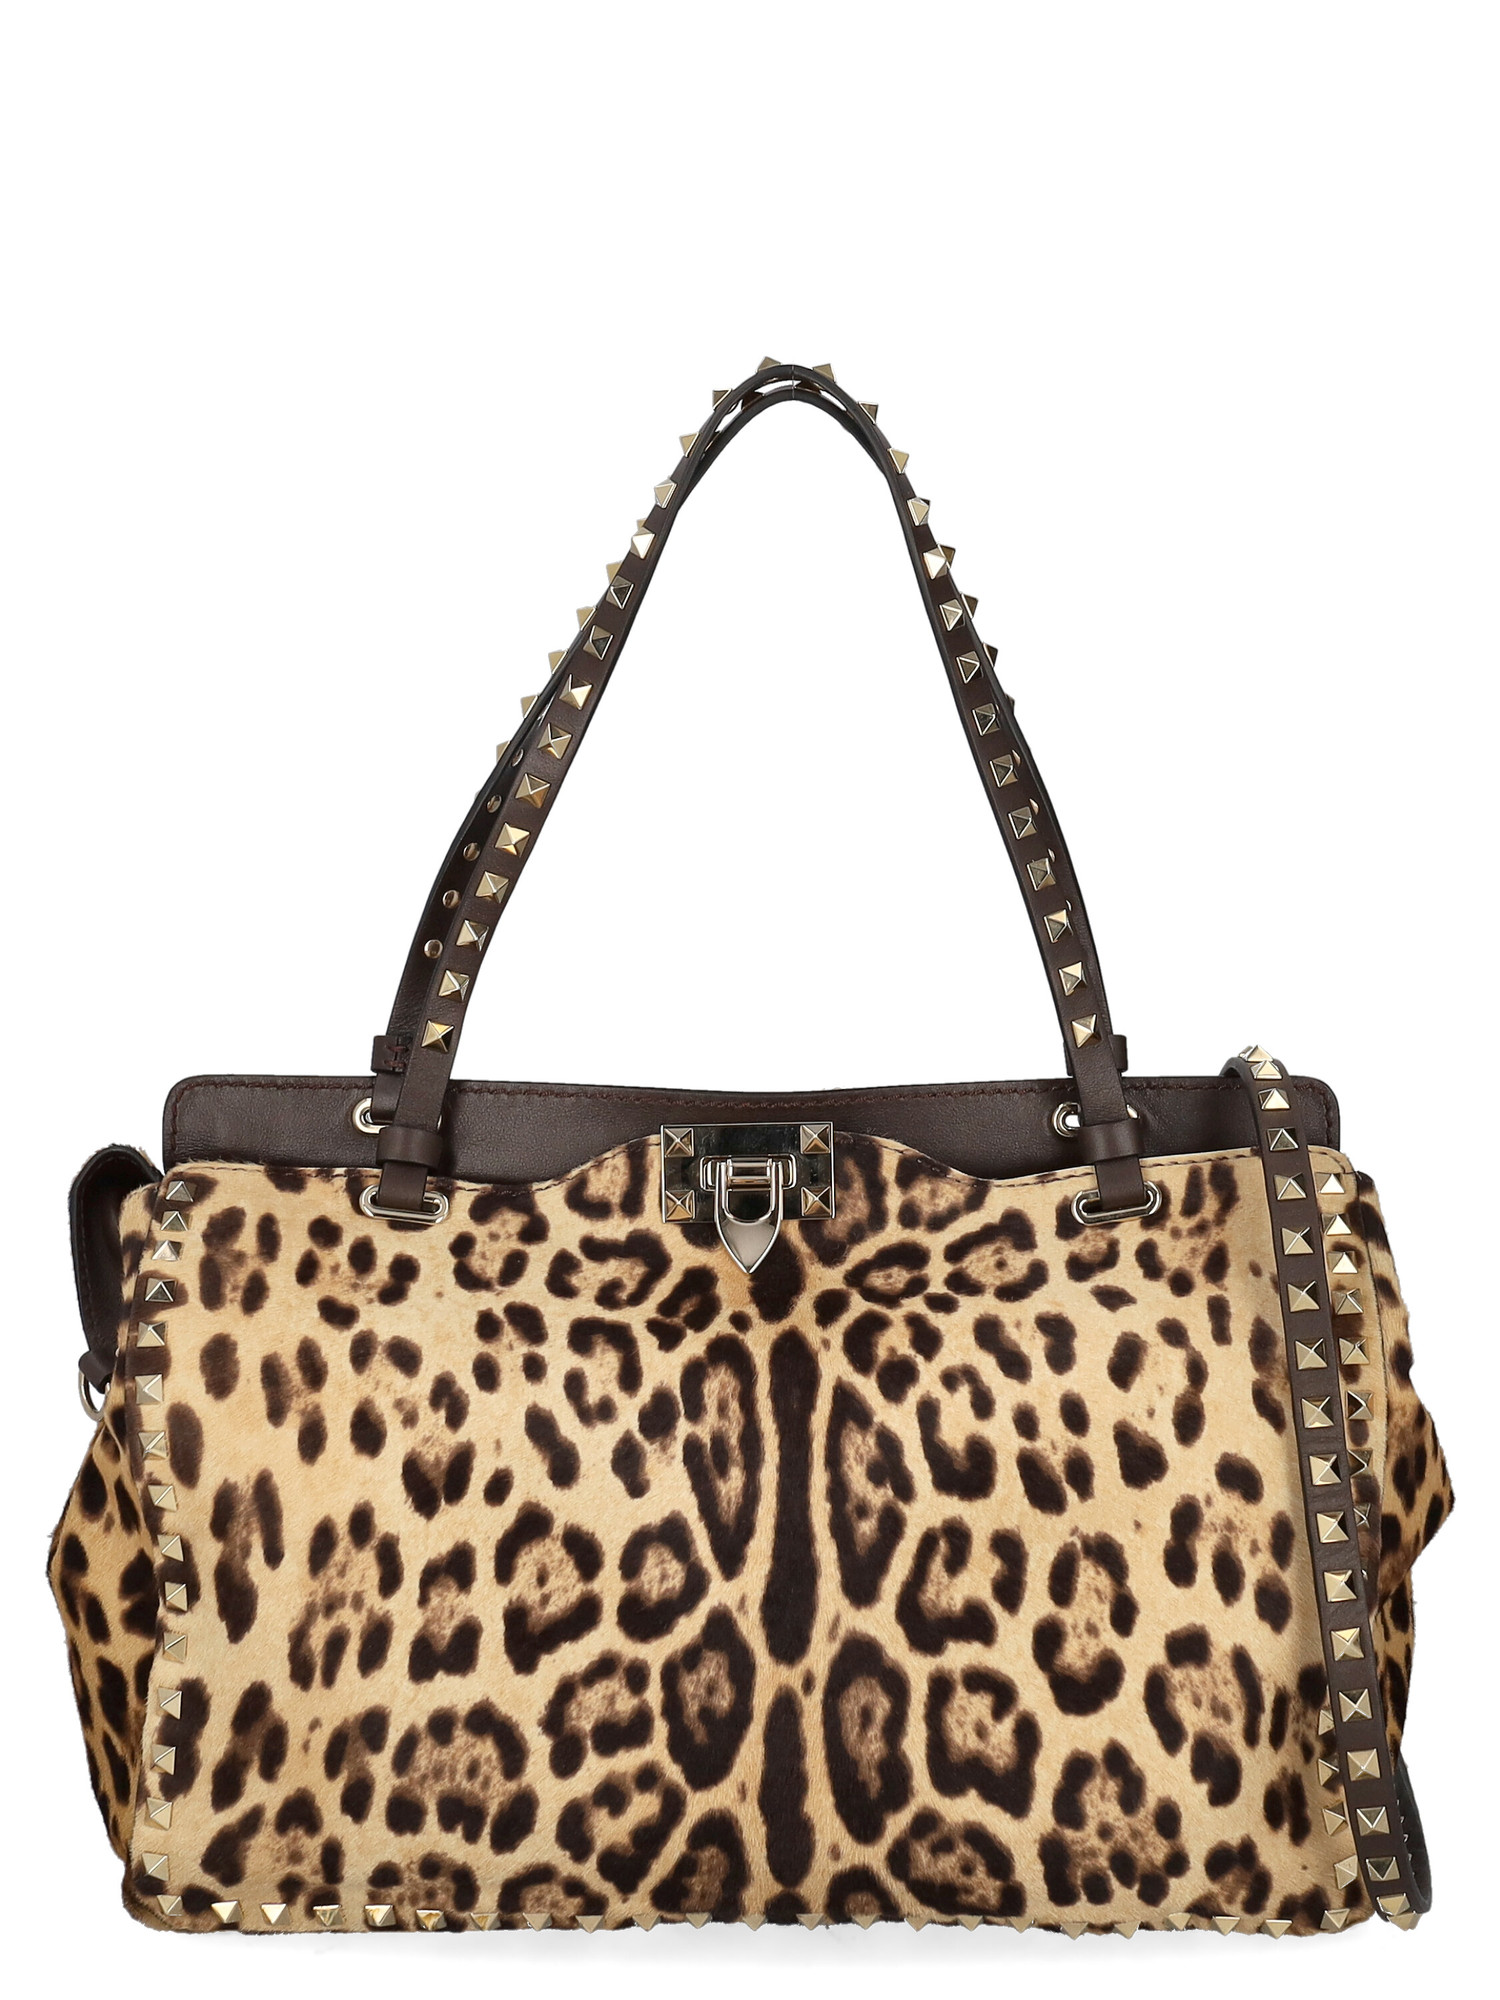 Condition: Very Good, Animal Print Leather, Color: Brown -  -  -